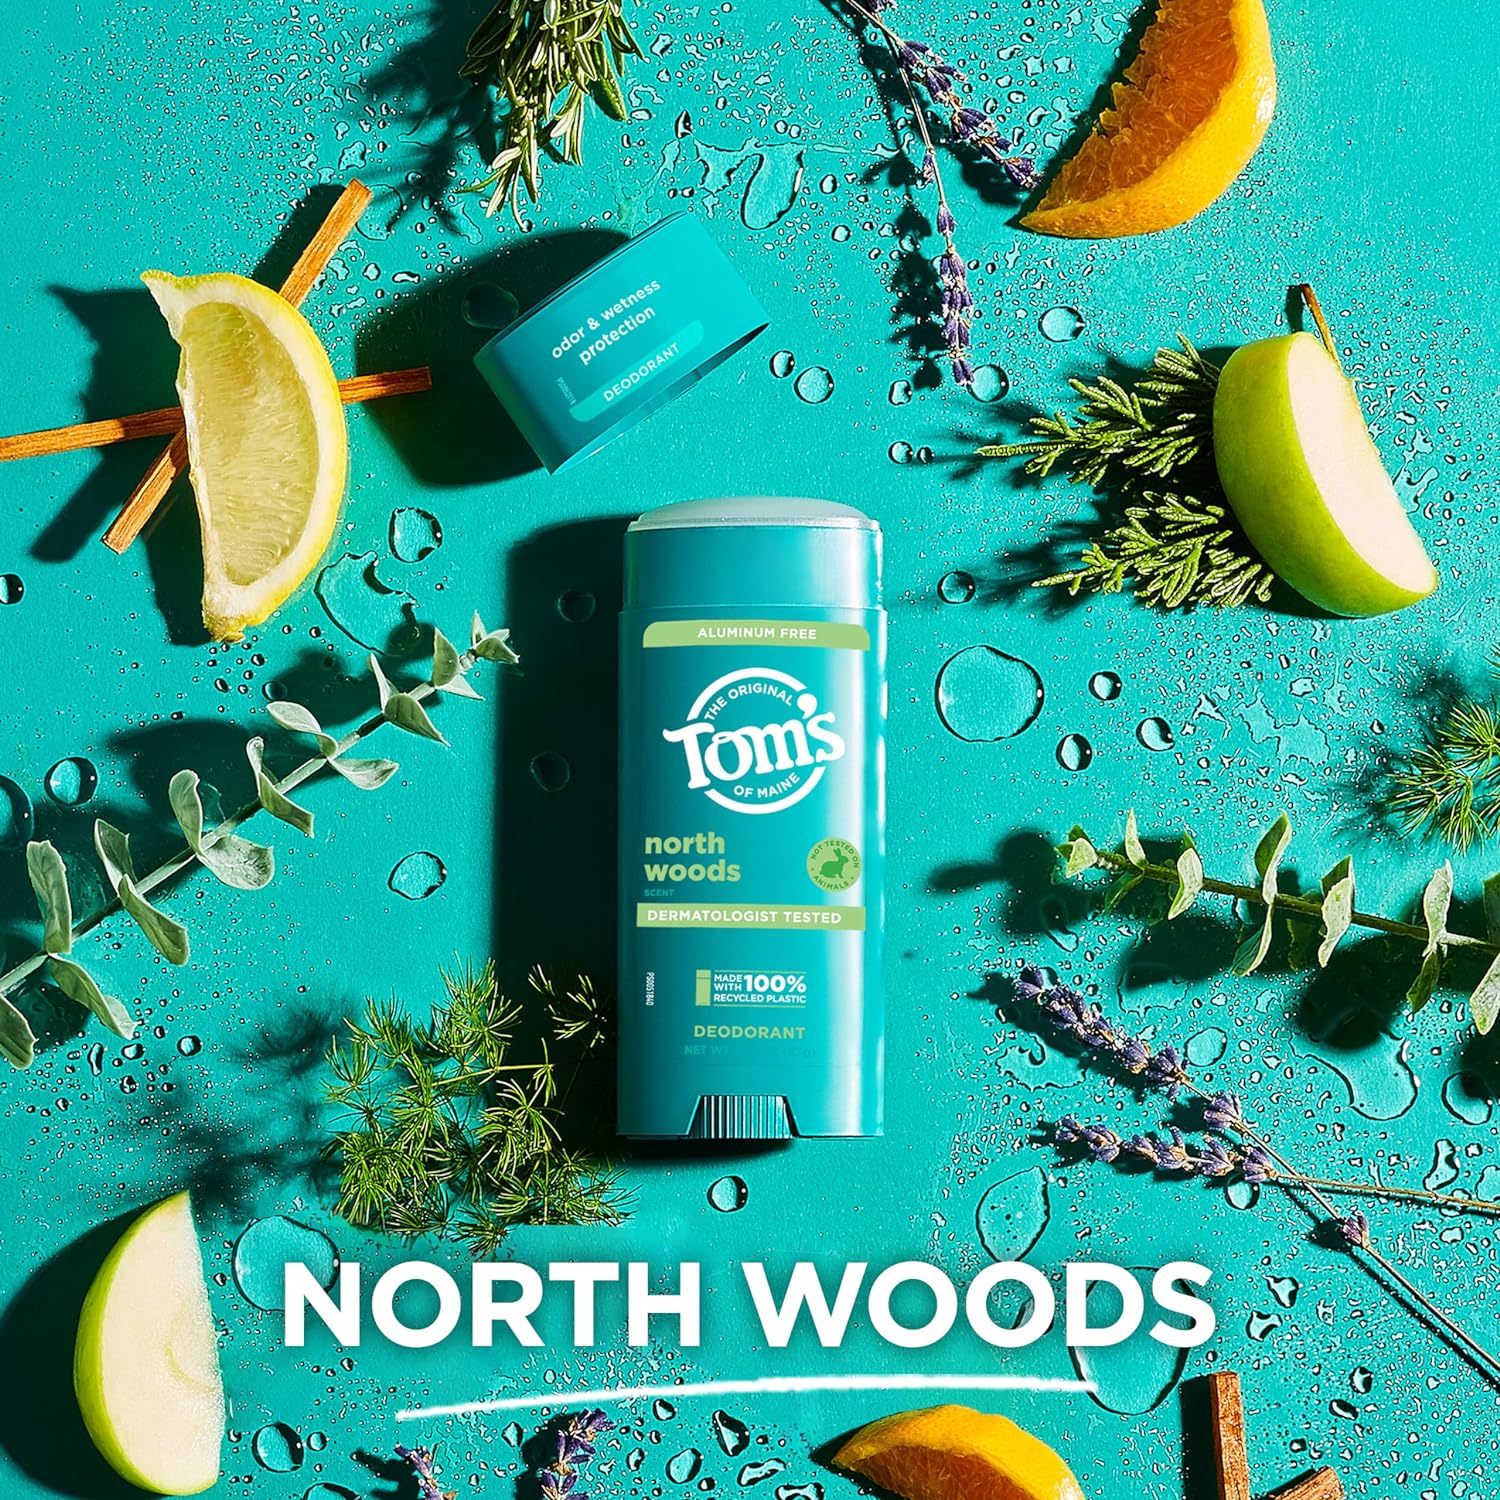 Tom’s of Maine North Woods Natural Deodorant for Men and Women, Aluminum Free, 3.25 oz, 2-Pack : Beauty & Personal Care